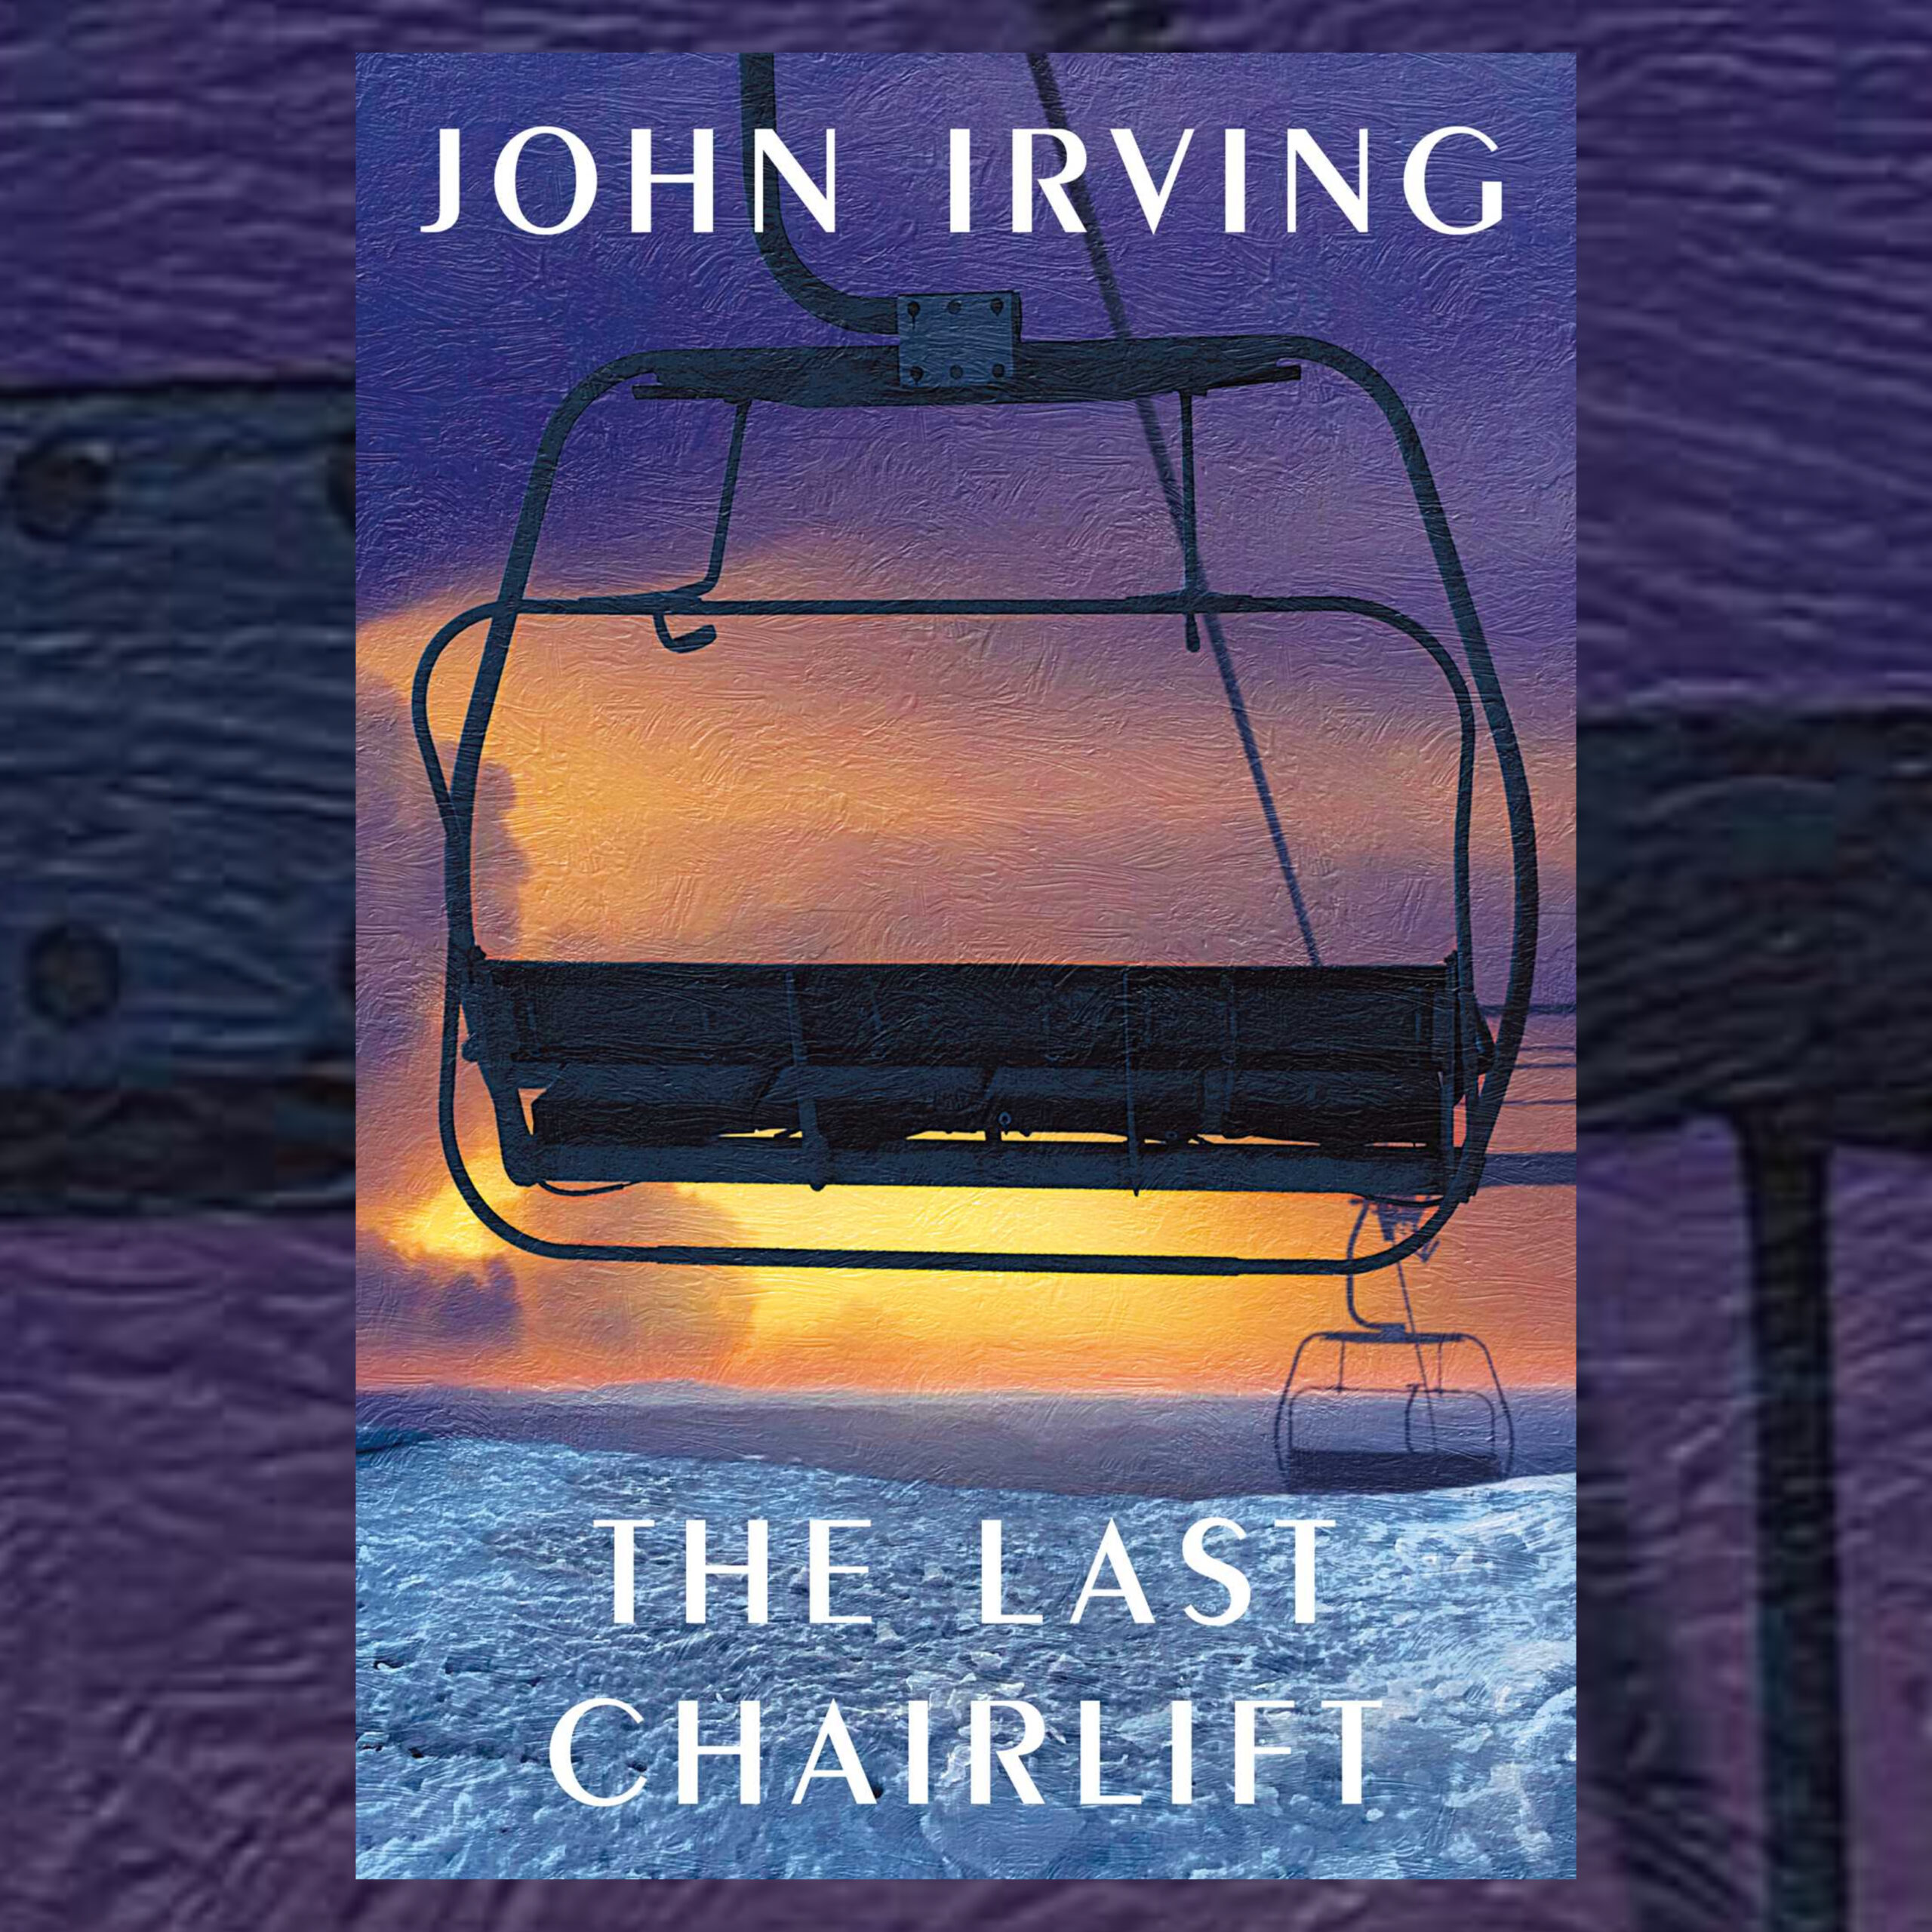 The Book Show - John Irving - The Chairlift (encore airing)